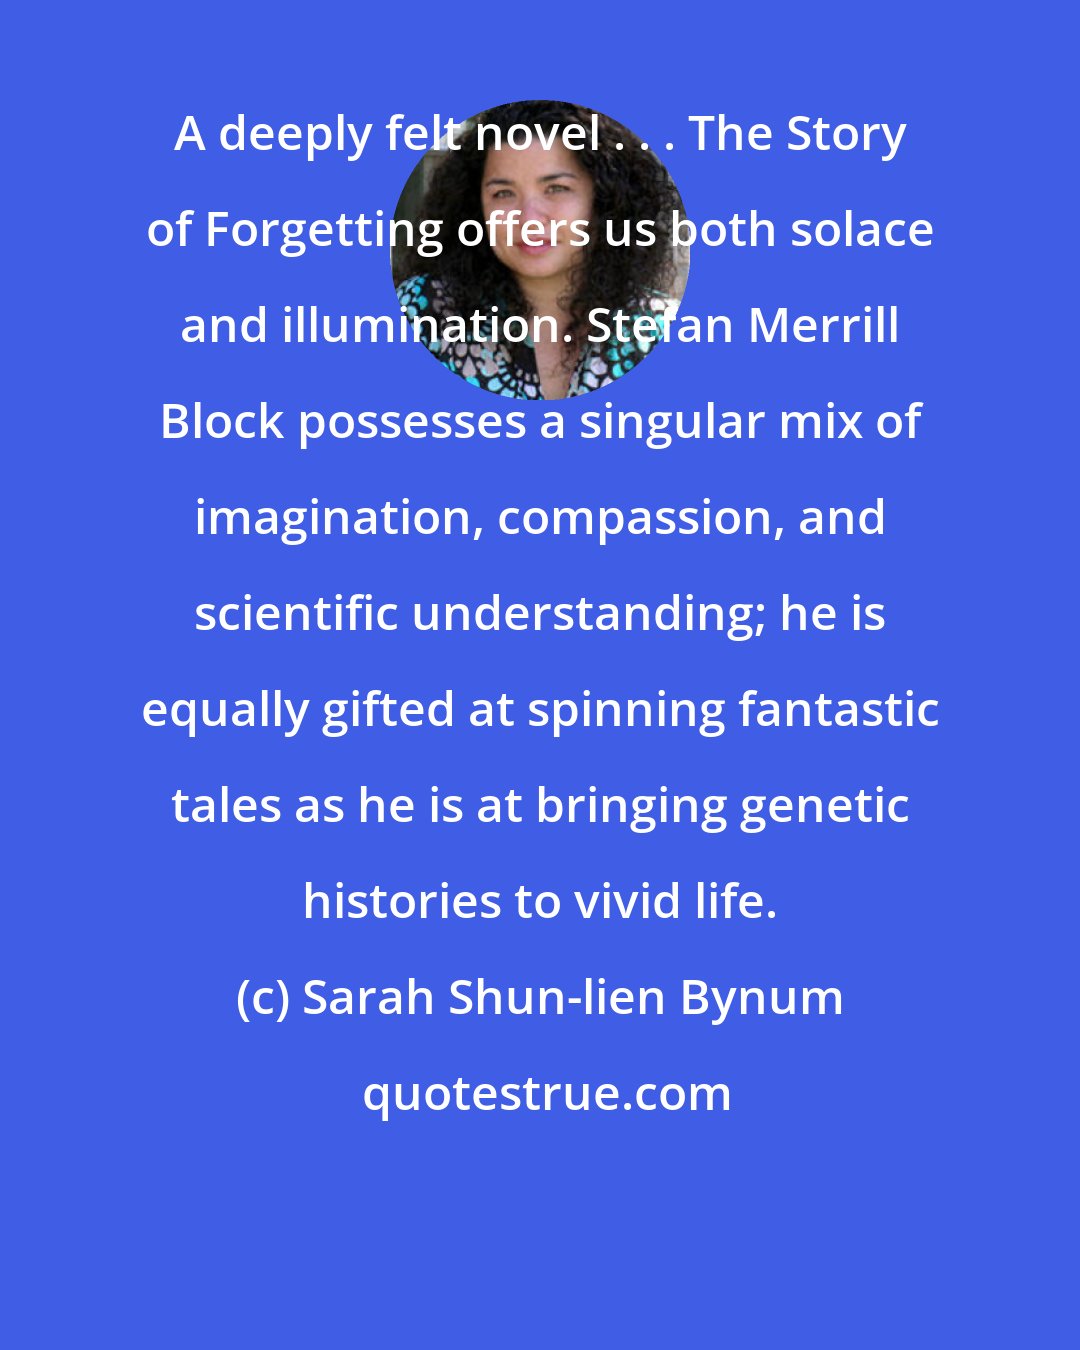 Sarah Shun-lien Bynum: A deeply felt novel . . . The Story of Forgetting offers us both solace and illumination. Stefan Merrill Block possesses a singular mix of imagination, compassion, and scientific understanding; he is equally gifted at spinning fantastic tales as he is at bringing genetic histories to vivid life.